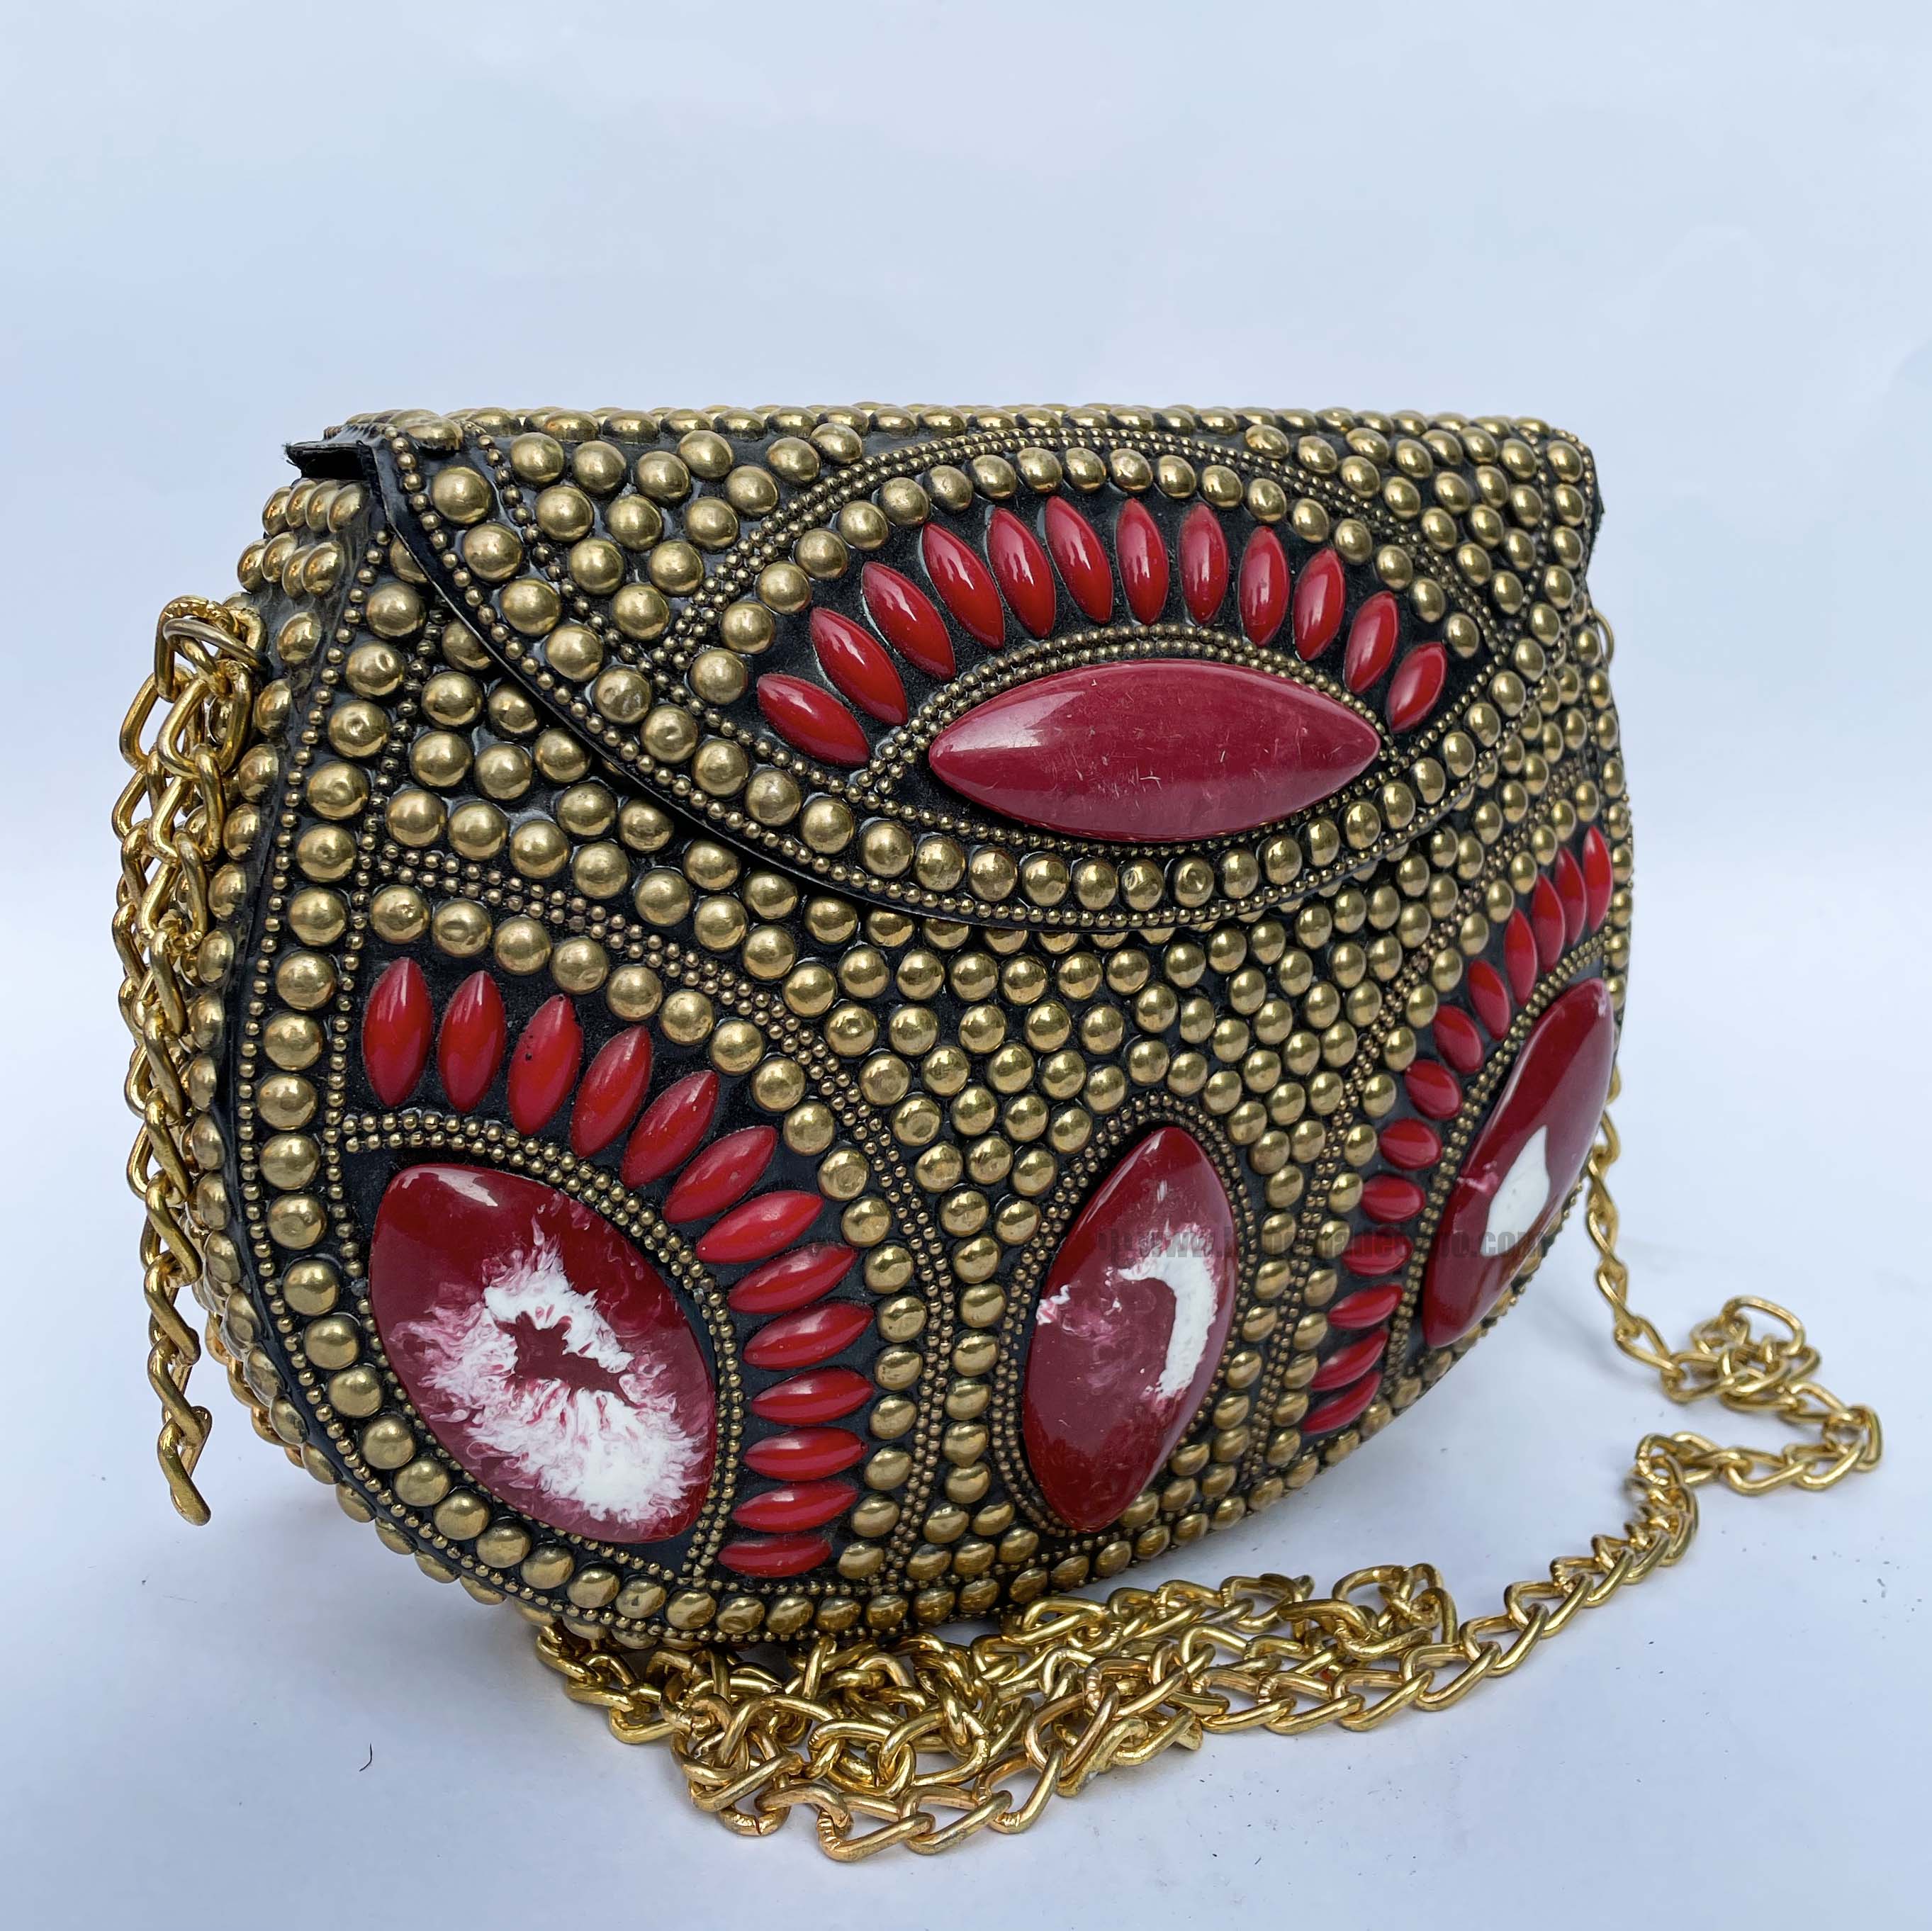 Nepali Handmade Big Ladies Bag With stone Setting, metal, golden And Red Color